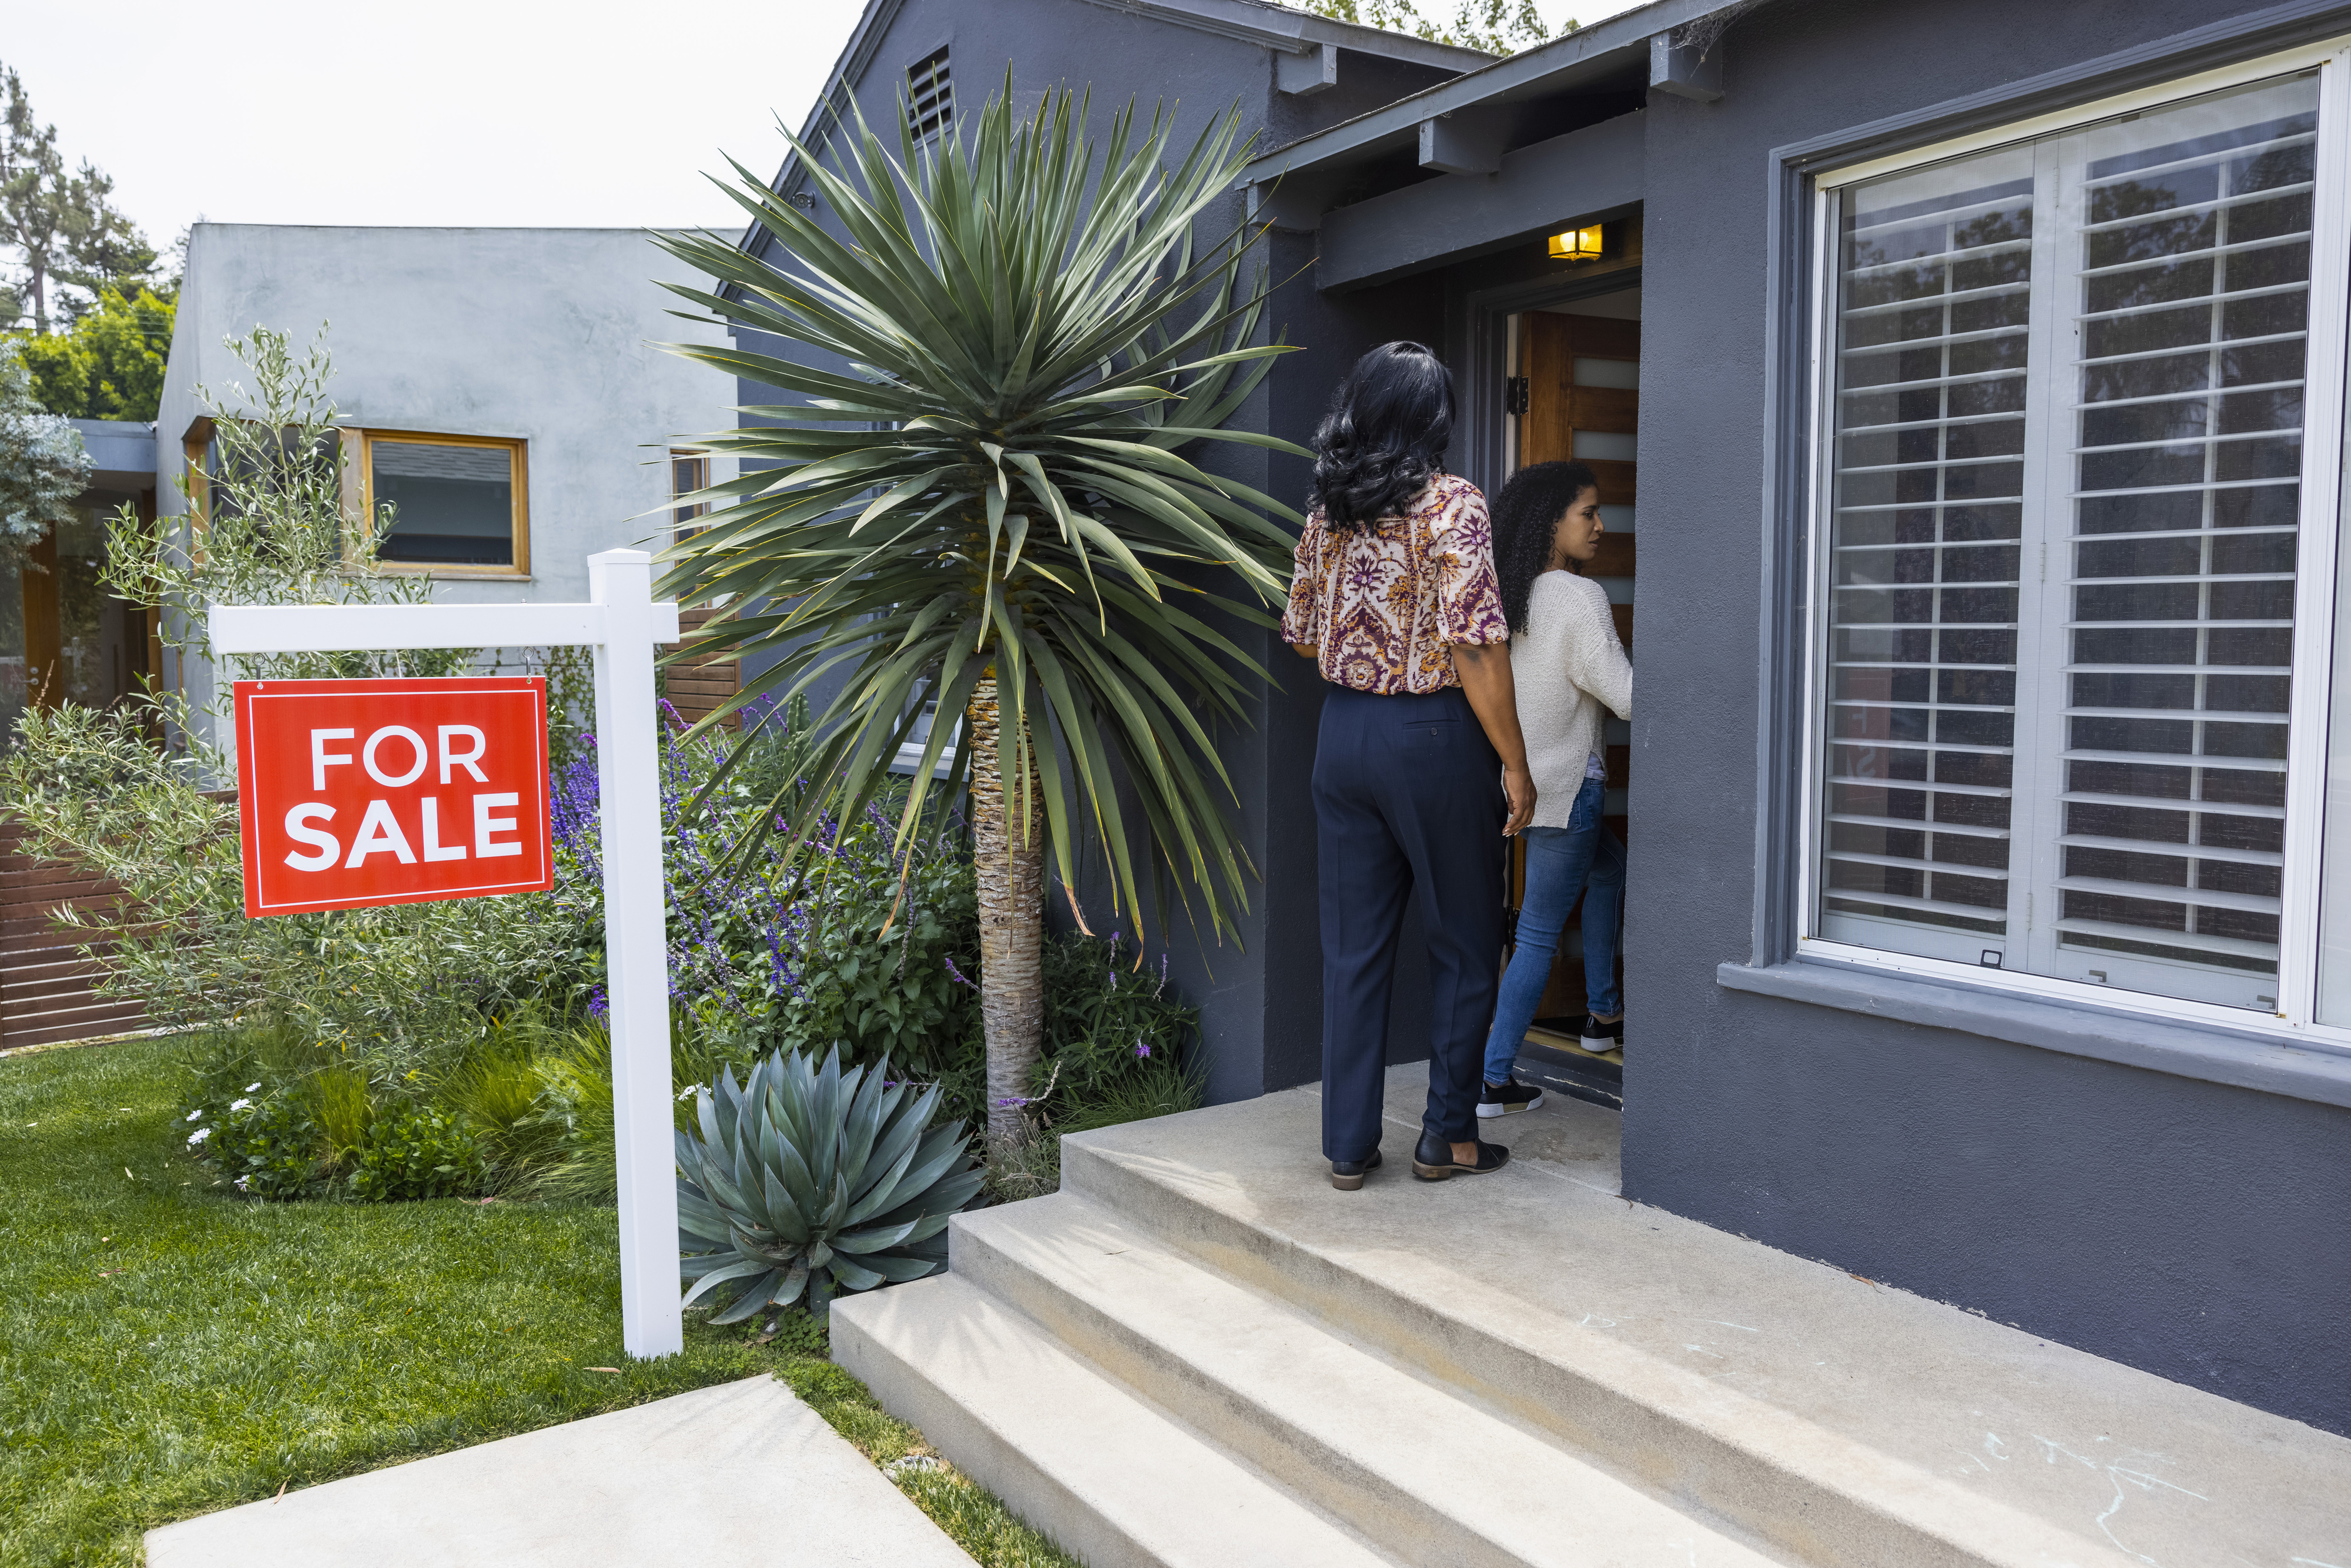 Women entering a house with a For Sale sign out front